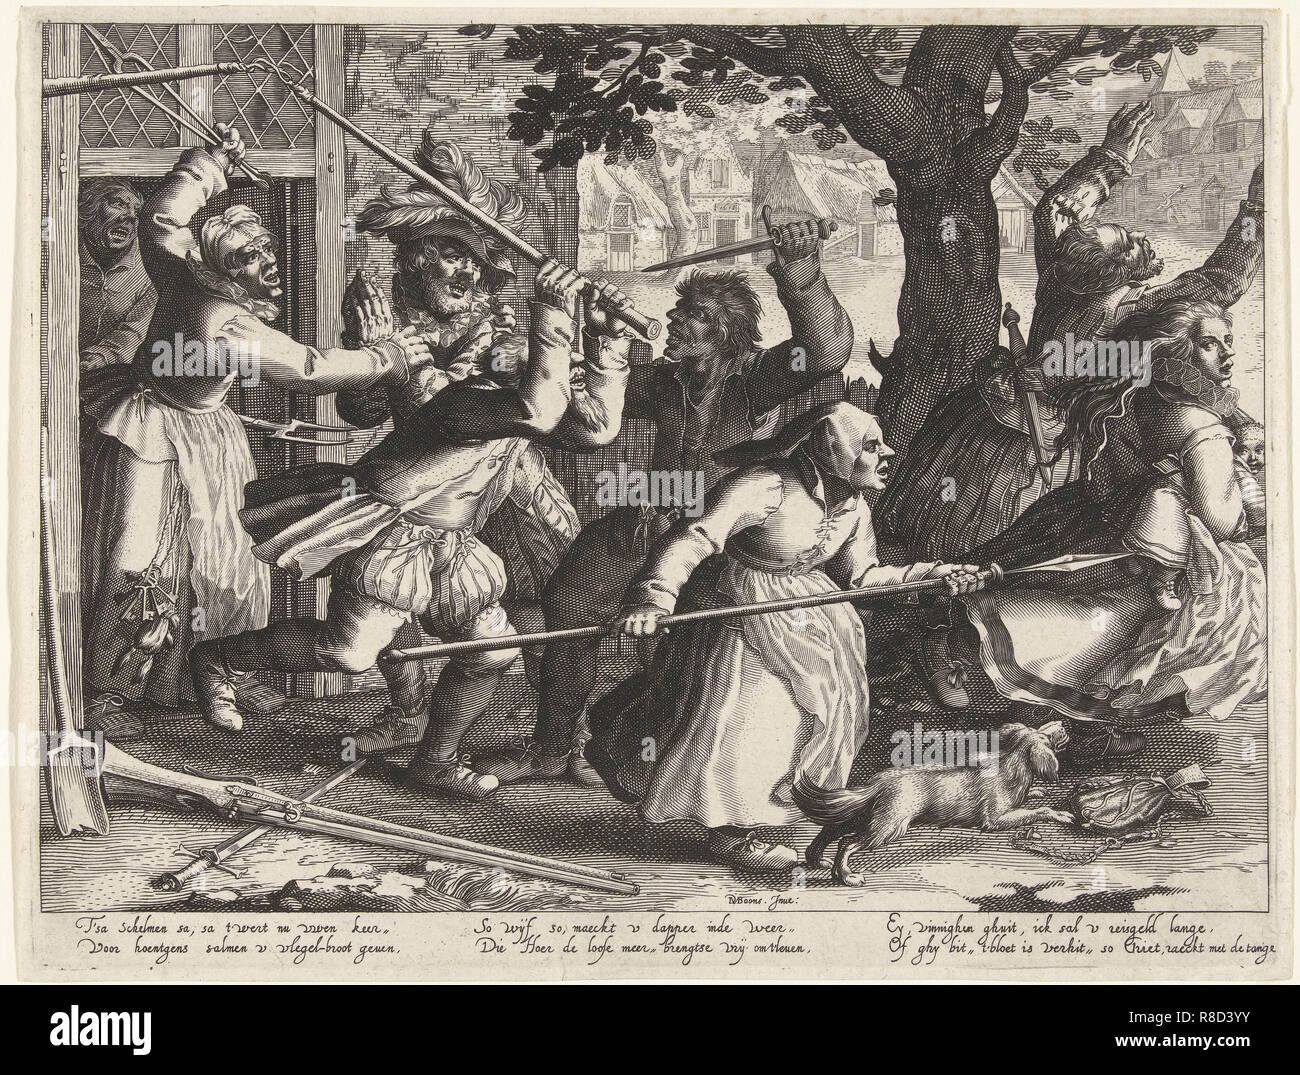 The rich people hunted out of their homes by armed peasants. From the Series Boereverdriet (Horrors Stock Photo